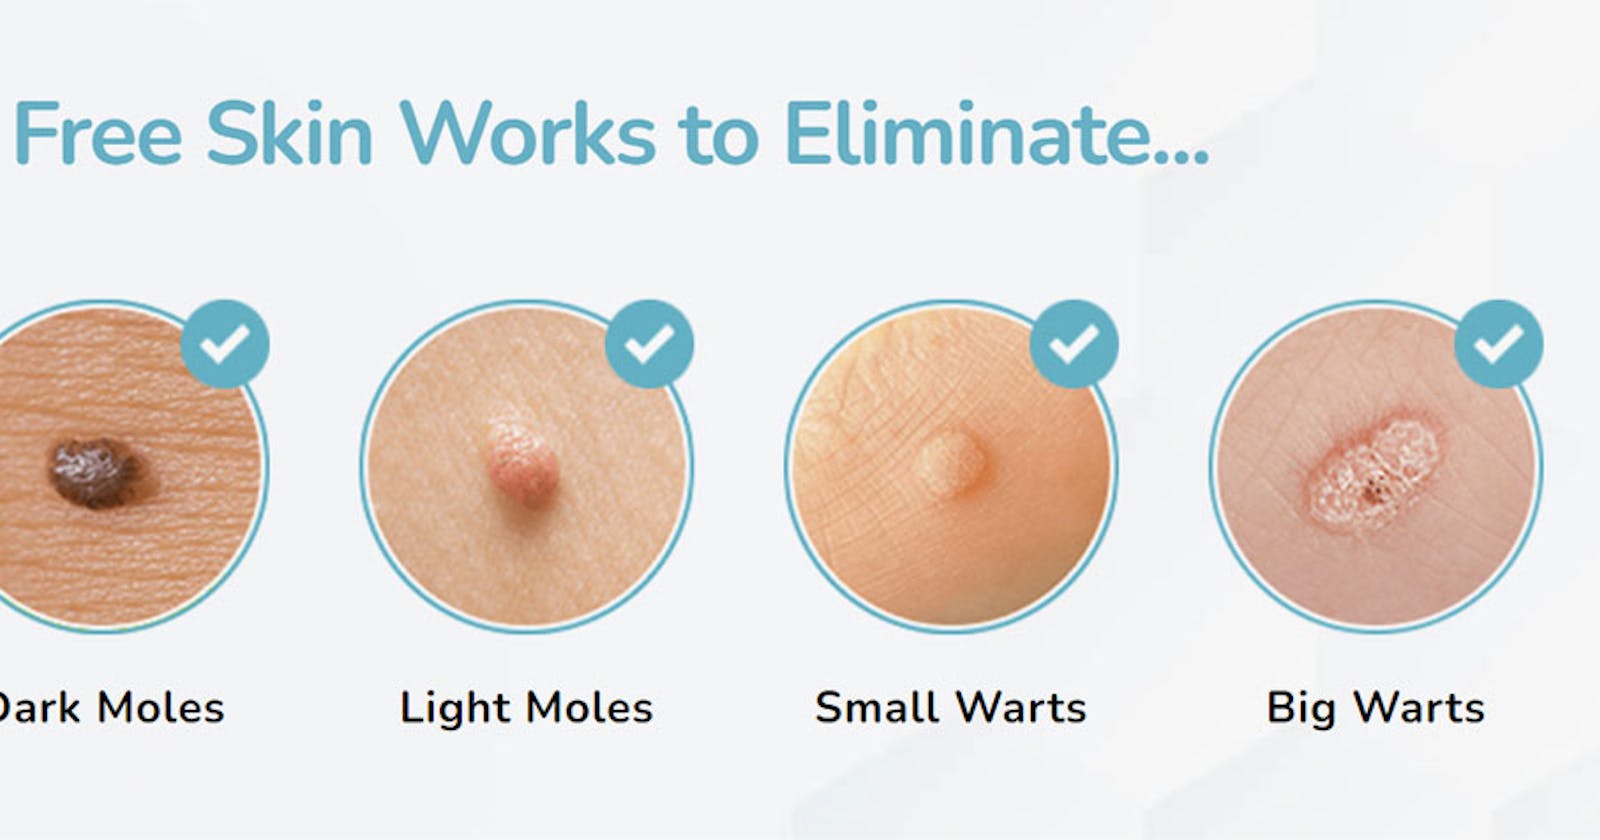 Anus Skin Tag Removal Cream Reviews Fraud Risks Exposed! Must Watch?